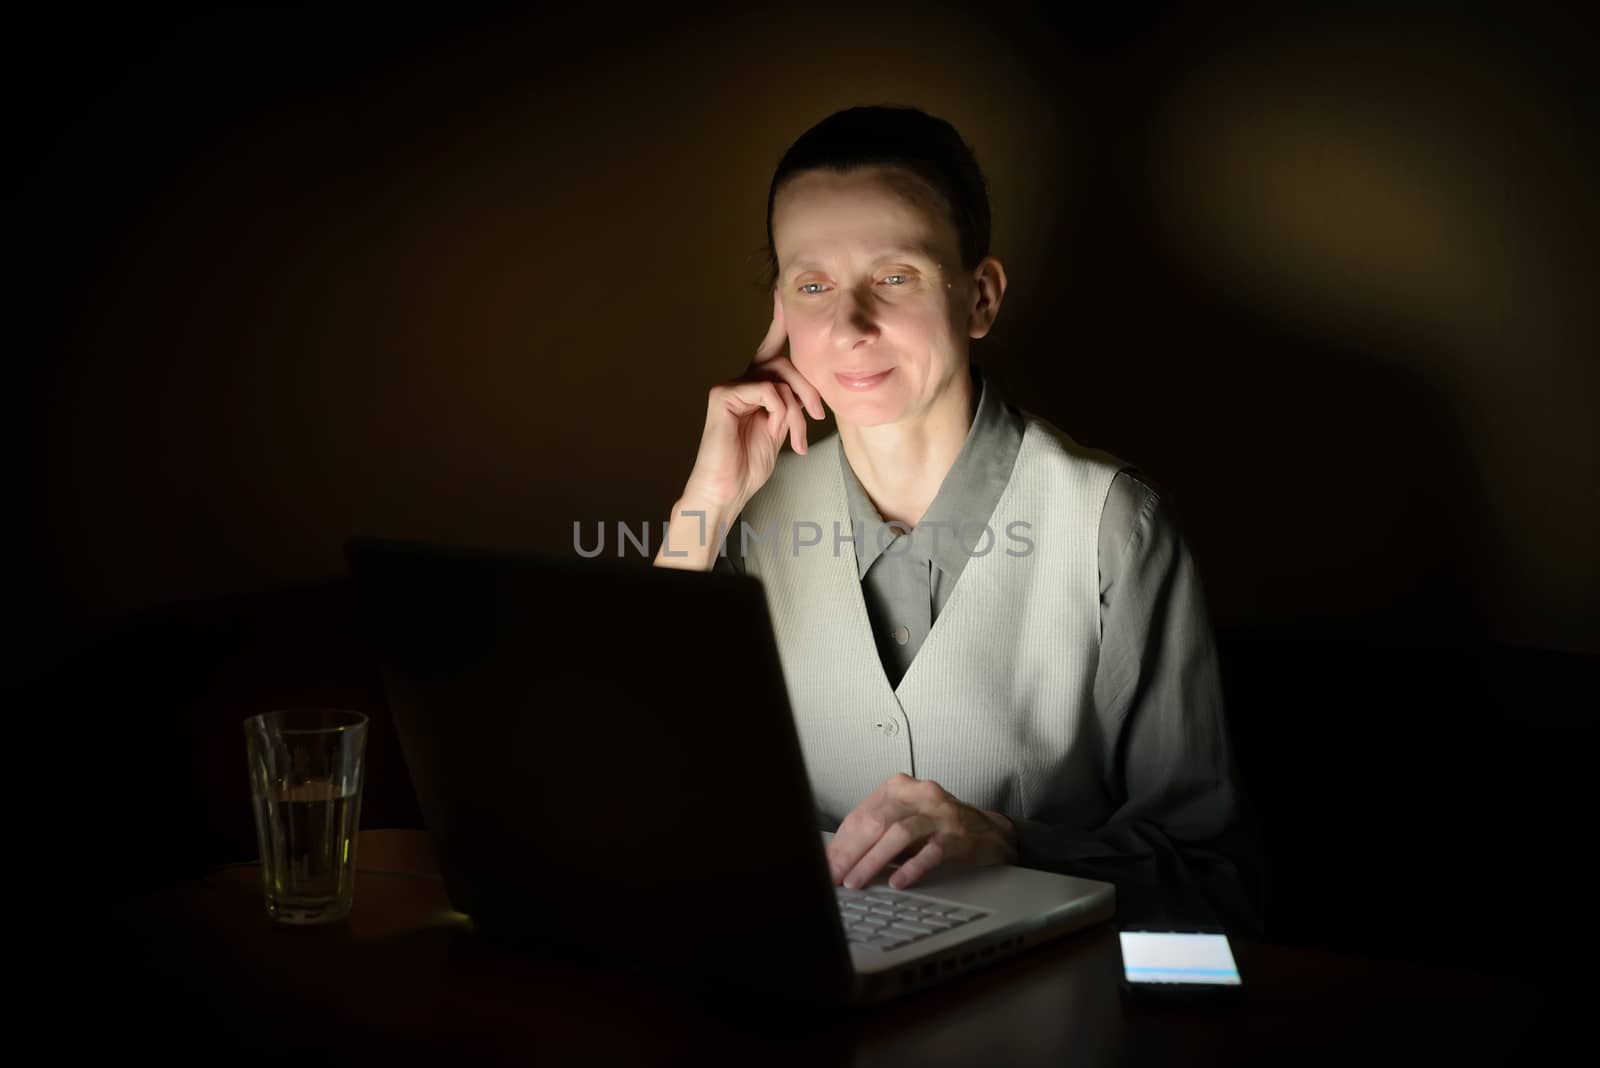 A business woman is using a computer in a dark room. Her face is illuminated by the light from the lcd monitor.